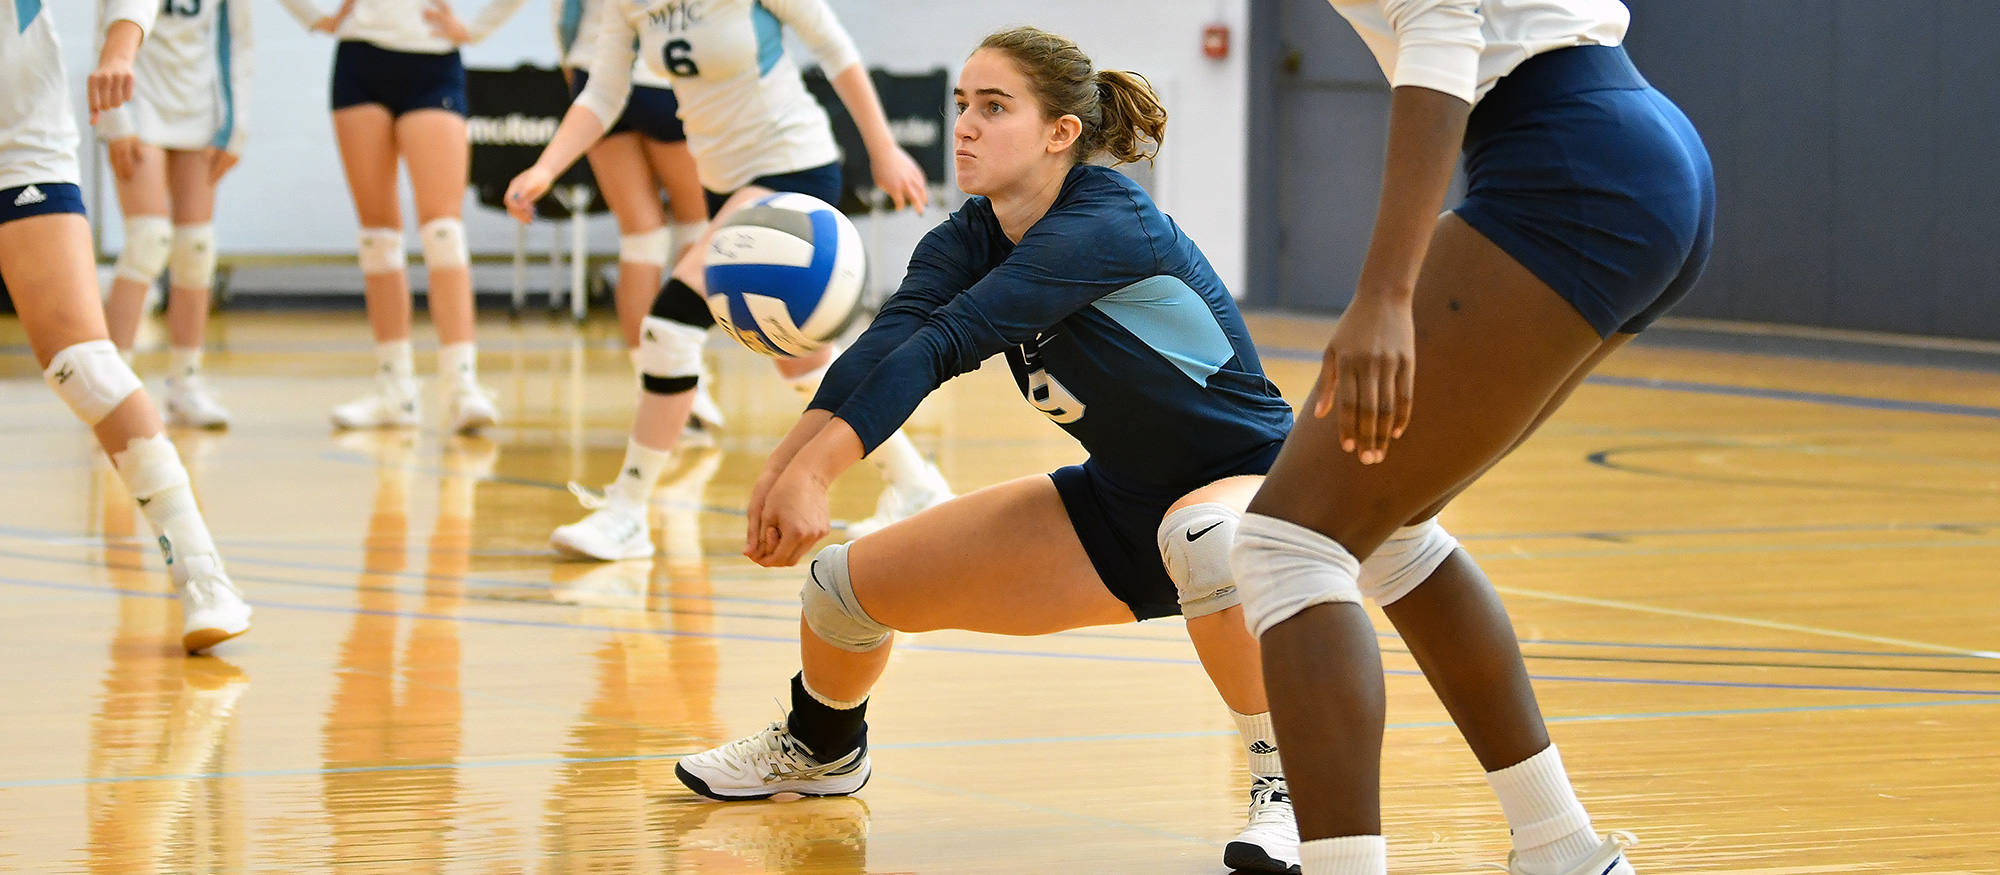 Lucie Berclaz had a combined 26 digs and 20 kills as Mount Holyoke split a pair of matches on Sept. 9, 2023, falling 3-1 to Framingham State and defeating Elms 3-0. (RJB Sports file photo)